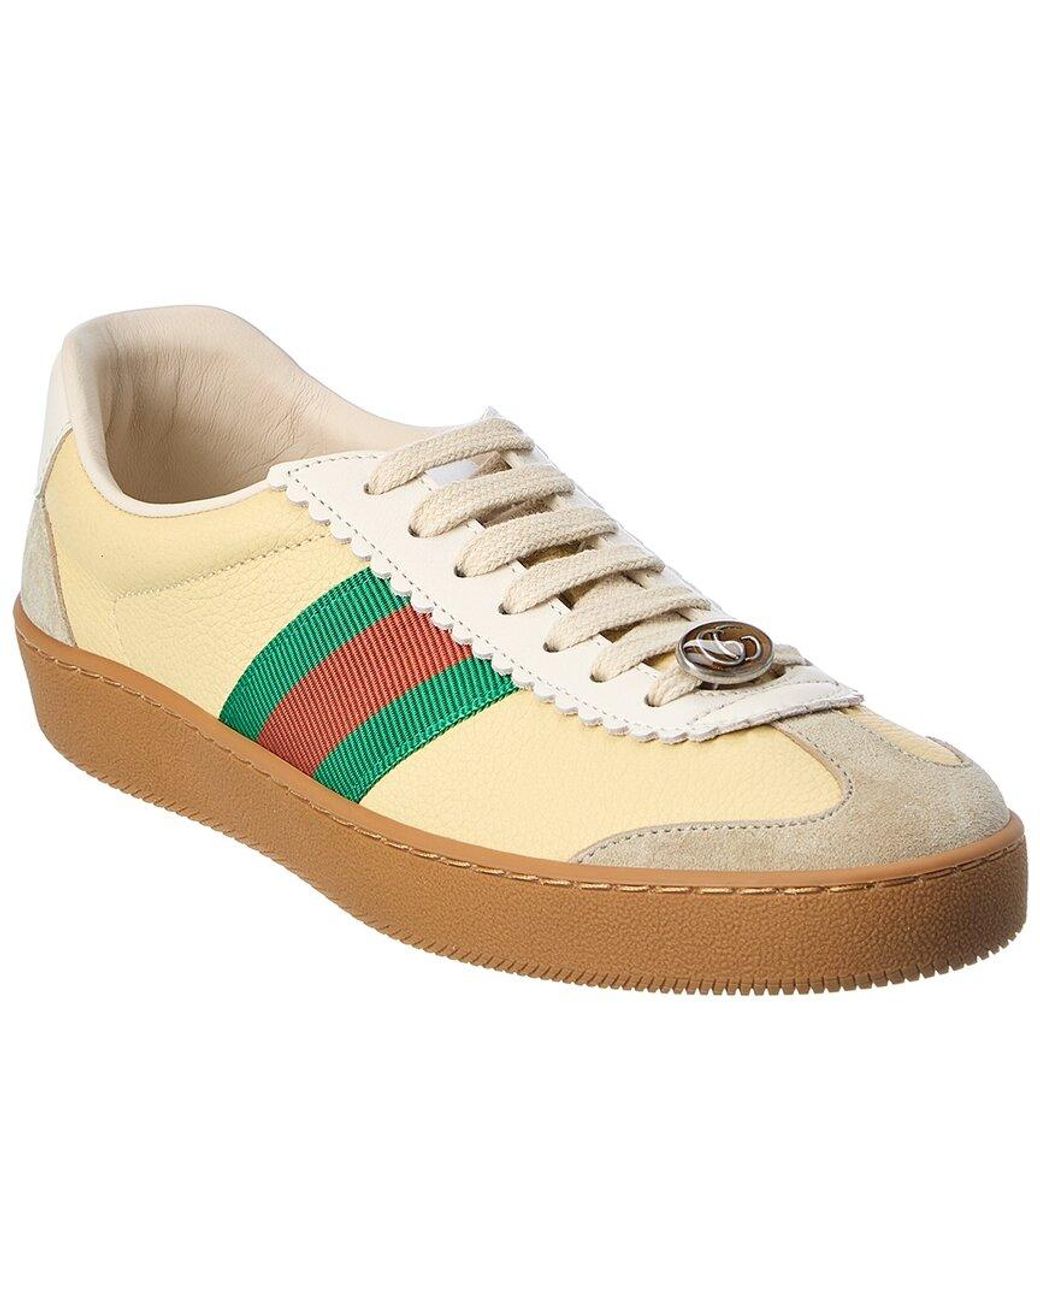 Calamity burst Tranquility Gucci Web Leather & Suede Sneaker in White | Lyst